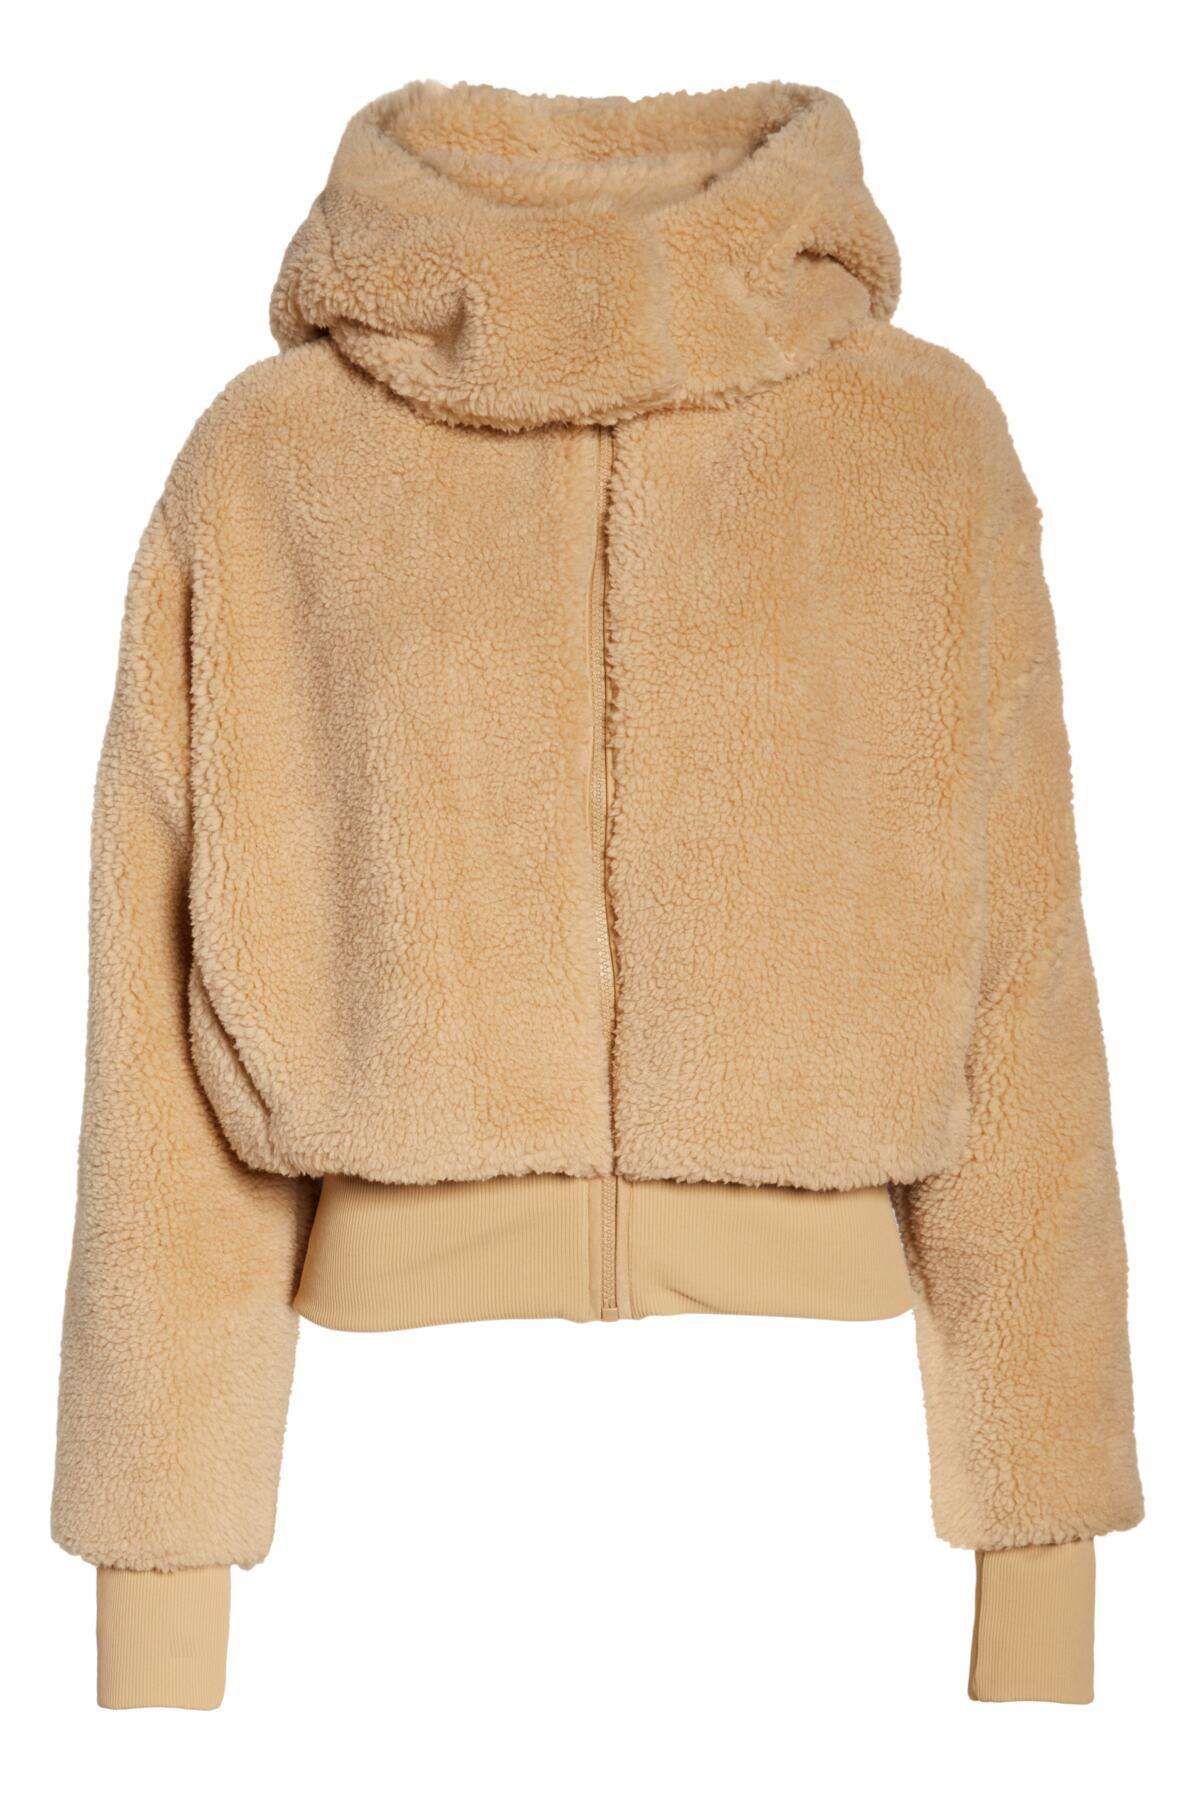 Alo Yoga Foxy Faux Fur Jacket in Camel (Natural) - Lyst